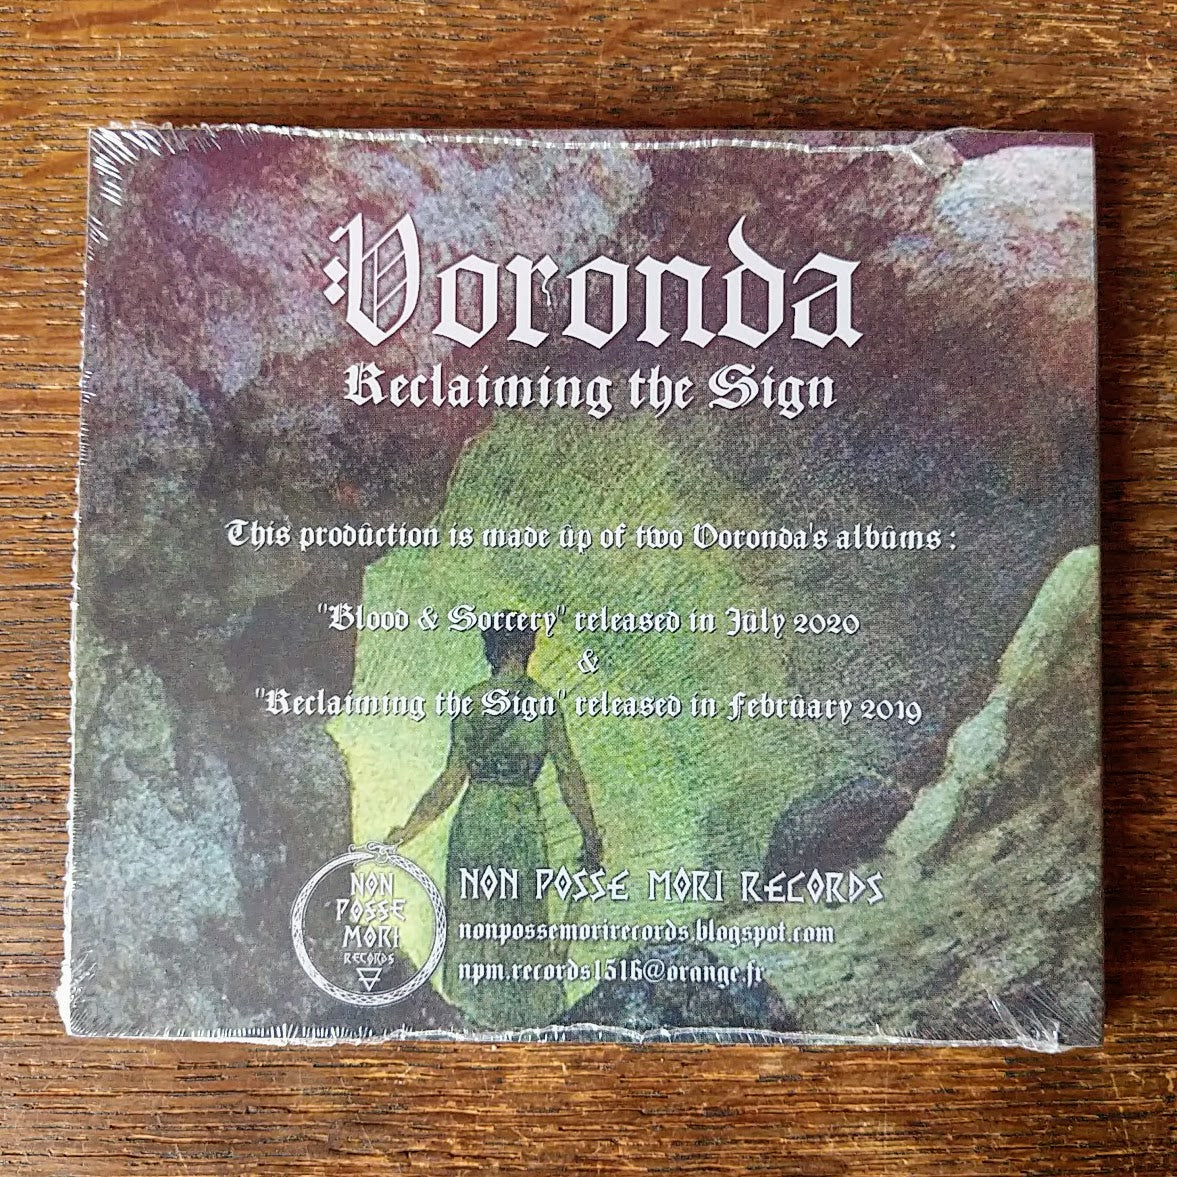 [SOLD OUT] VORONDA "Blood & Sorcery / Reclaiming the Sign" CD